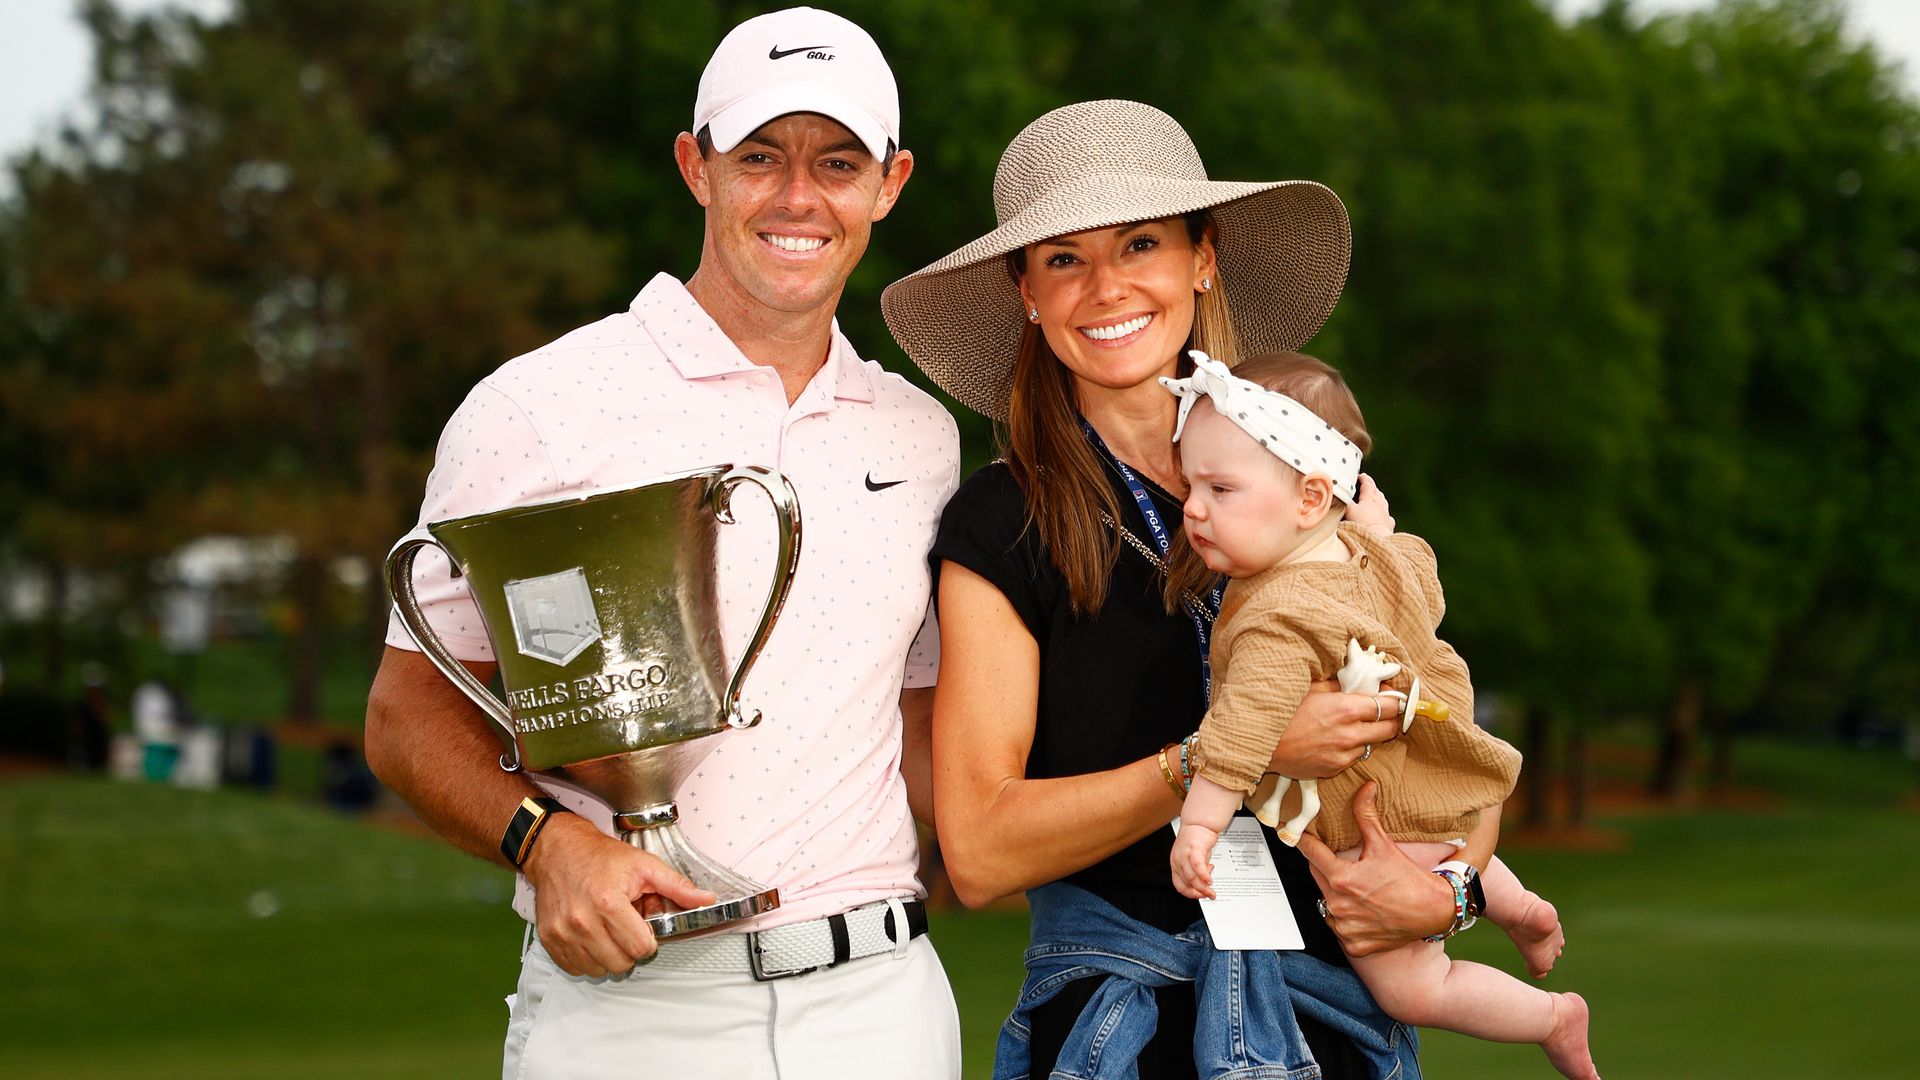 Rory McIlroy with his wife Erica and daughter Poppy smiling with a trophy